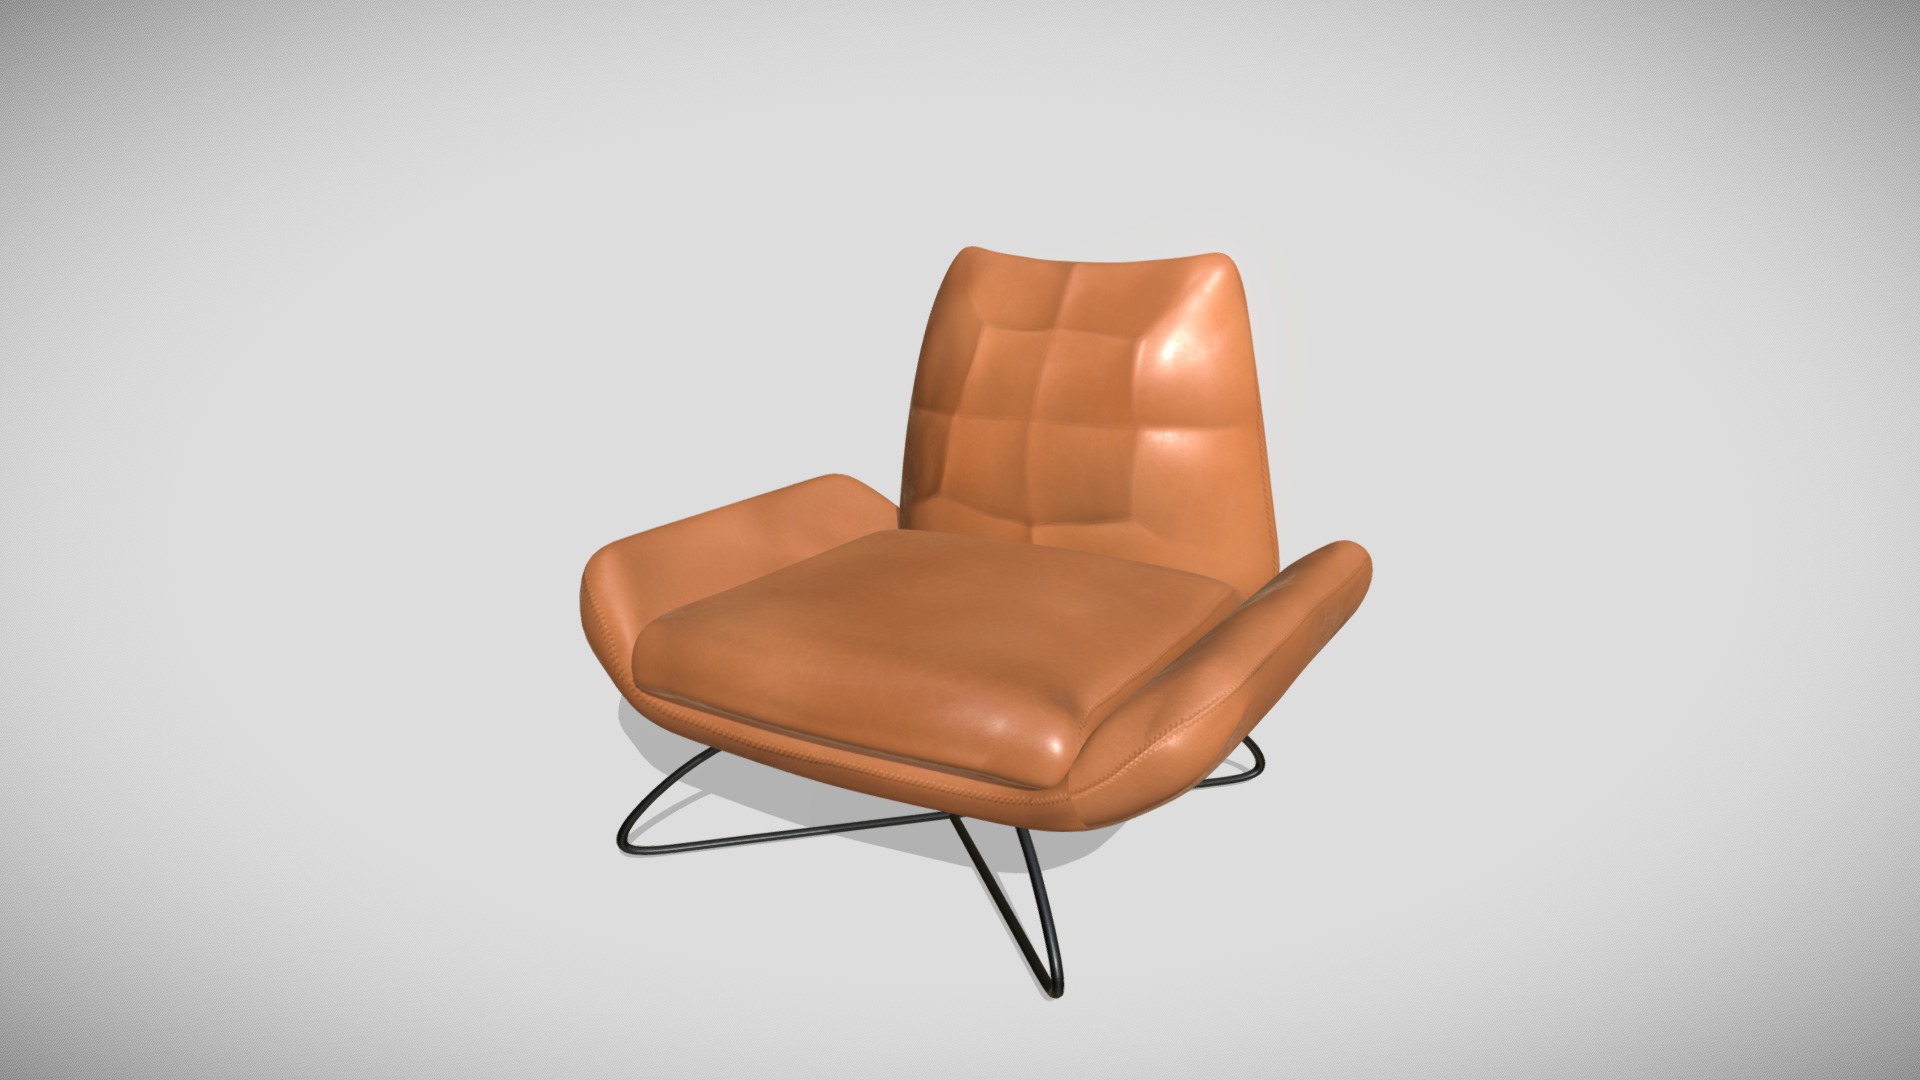 3D model Leather chair - This is a 3D model of the Leather chair. The 3D model is about a brown leather chair.